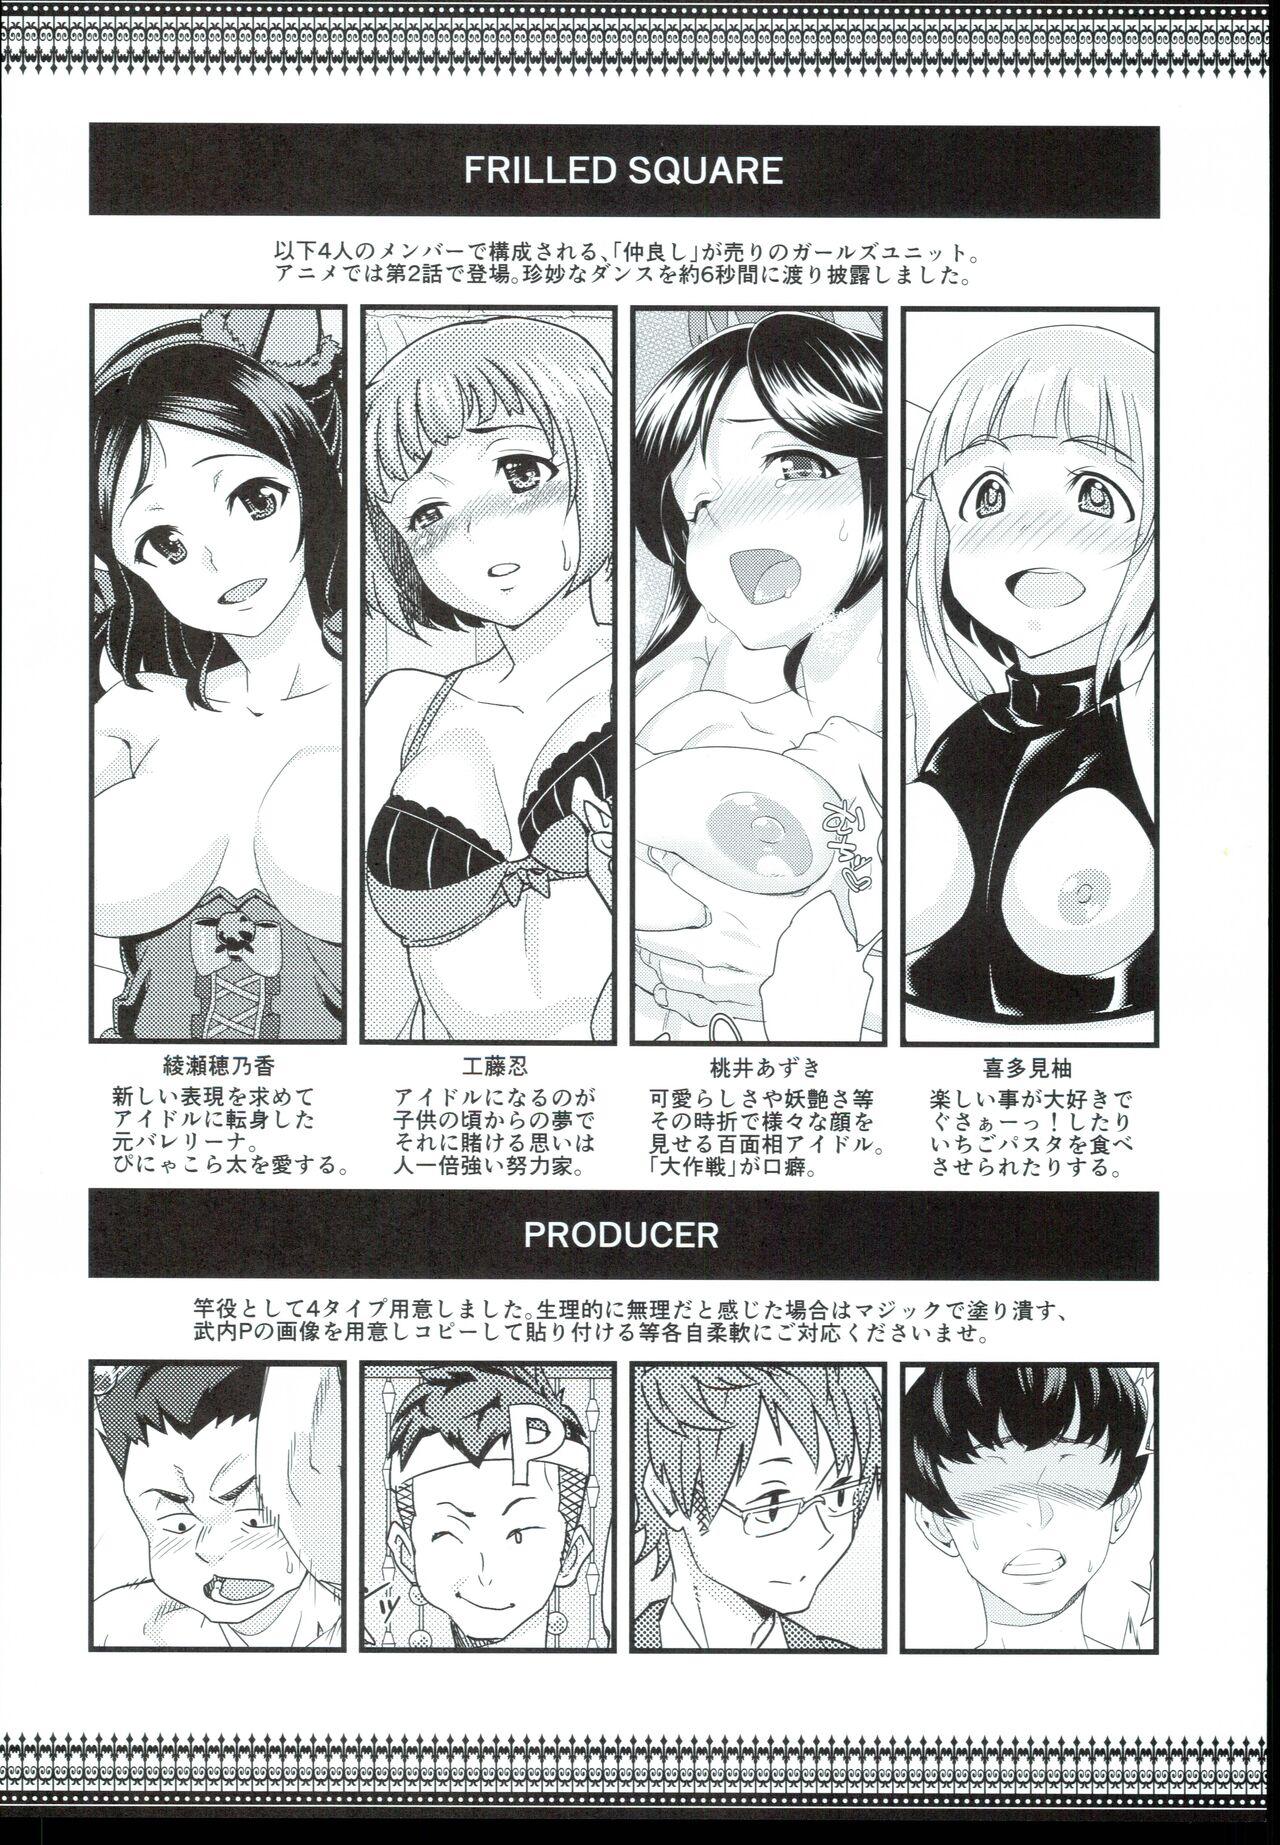 Twistys FRILLED SQUARE no Erohon FRISQE - The idolmaster Bokep - Page 4